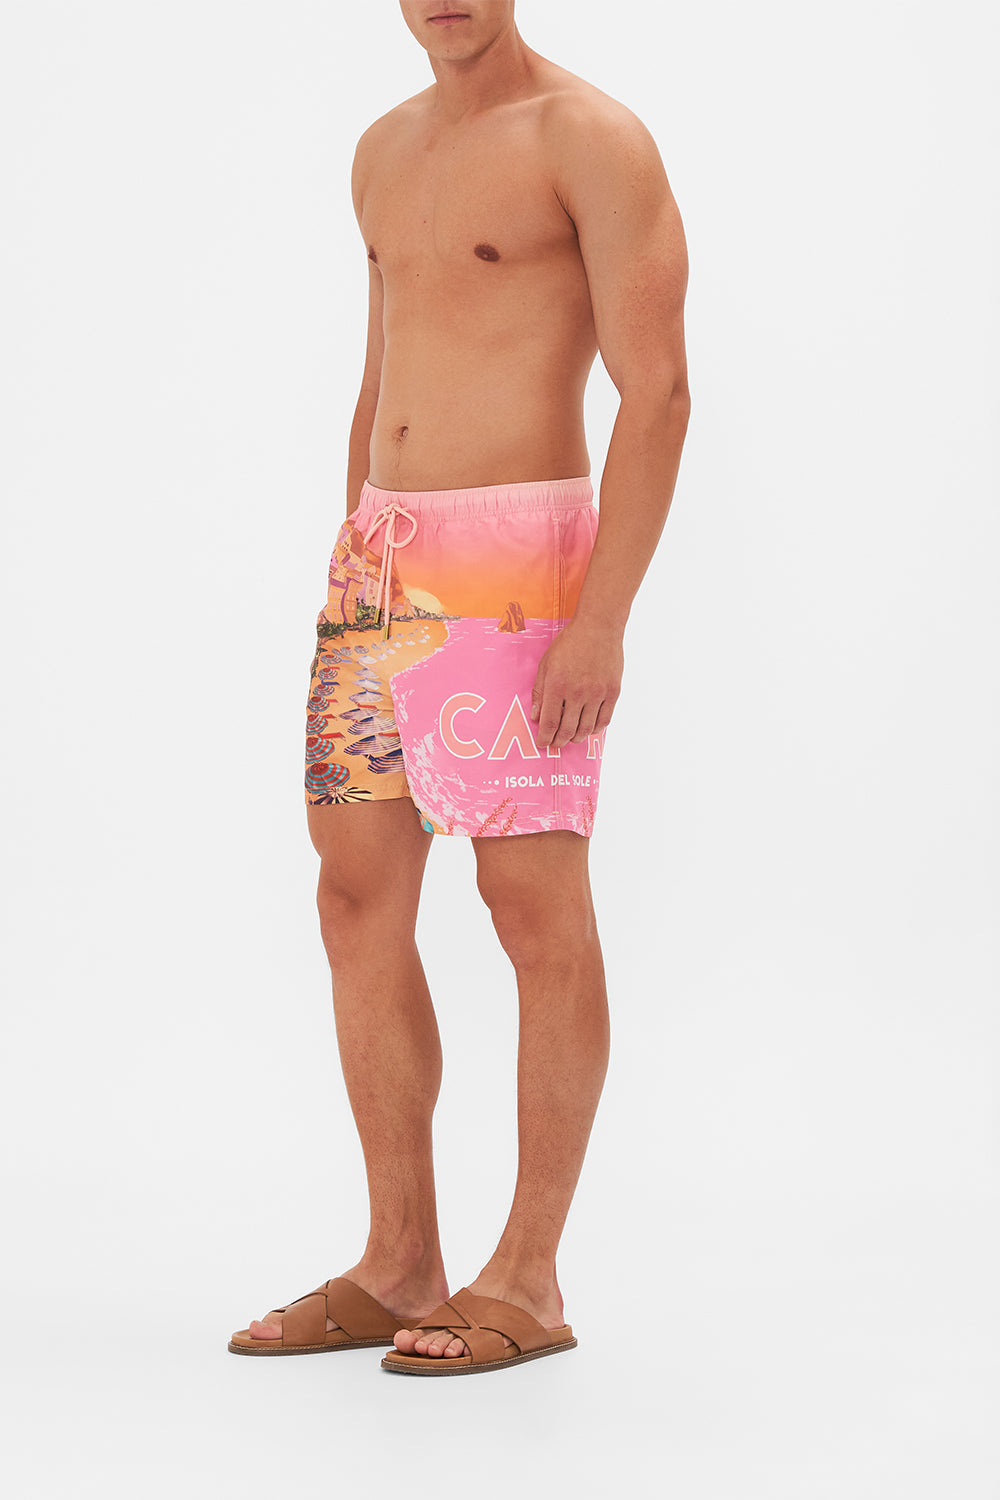 Side view of model wearing Hotel Franks By CAMILLA mens boardshorts in Capri Me print